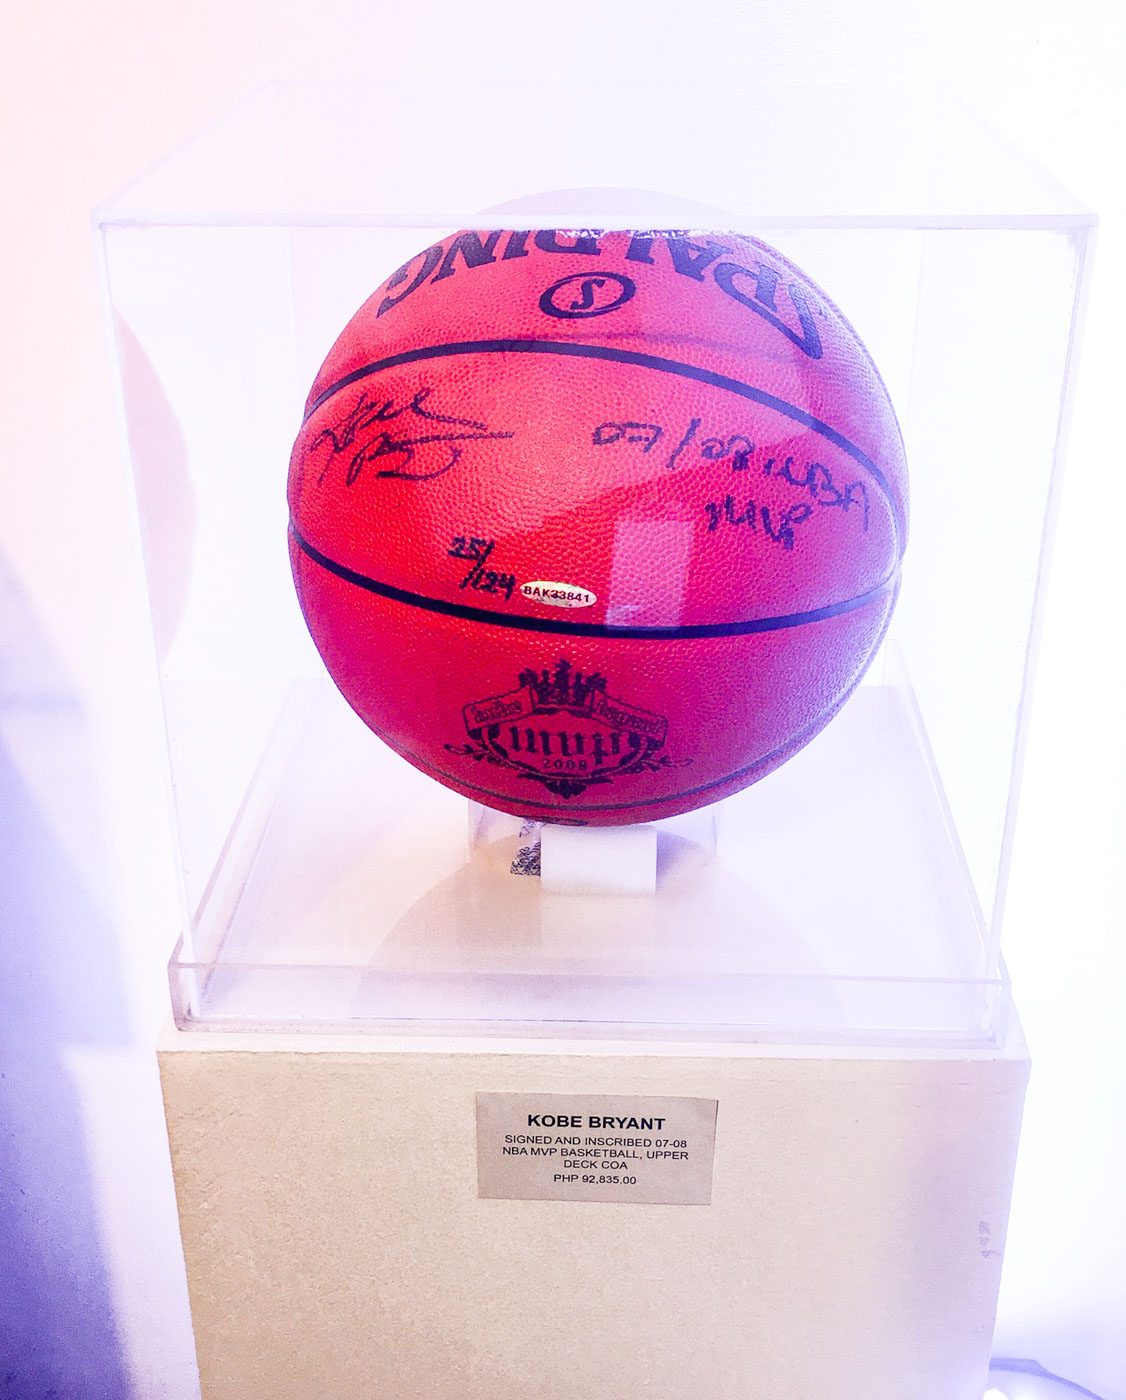 REAL DEAL. Kobe Bryant signed and inscribed the Spalding basketball when he was crowned the 2007-2008 Season MVP. Photo by Beatrice Go/Rappler 